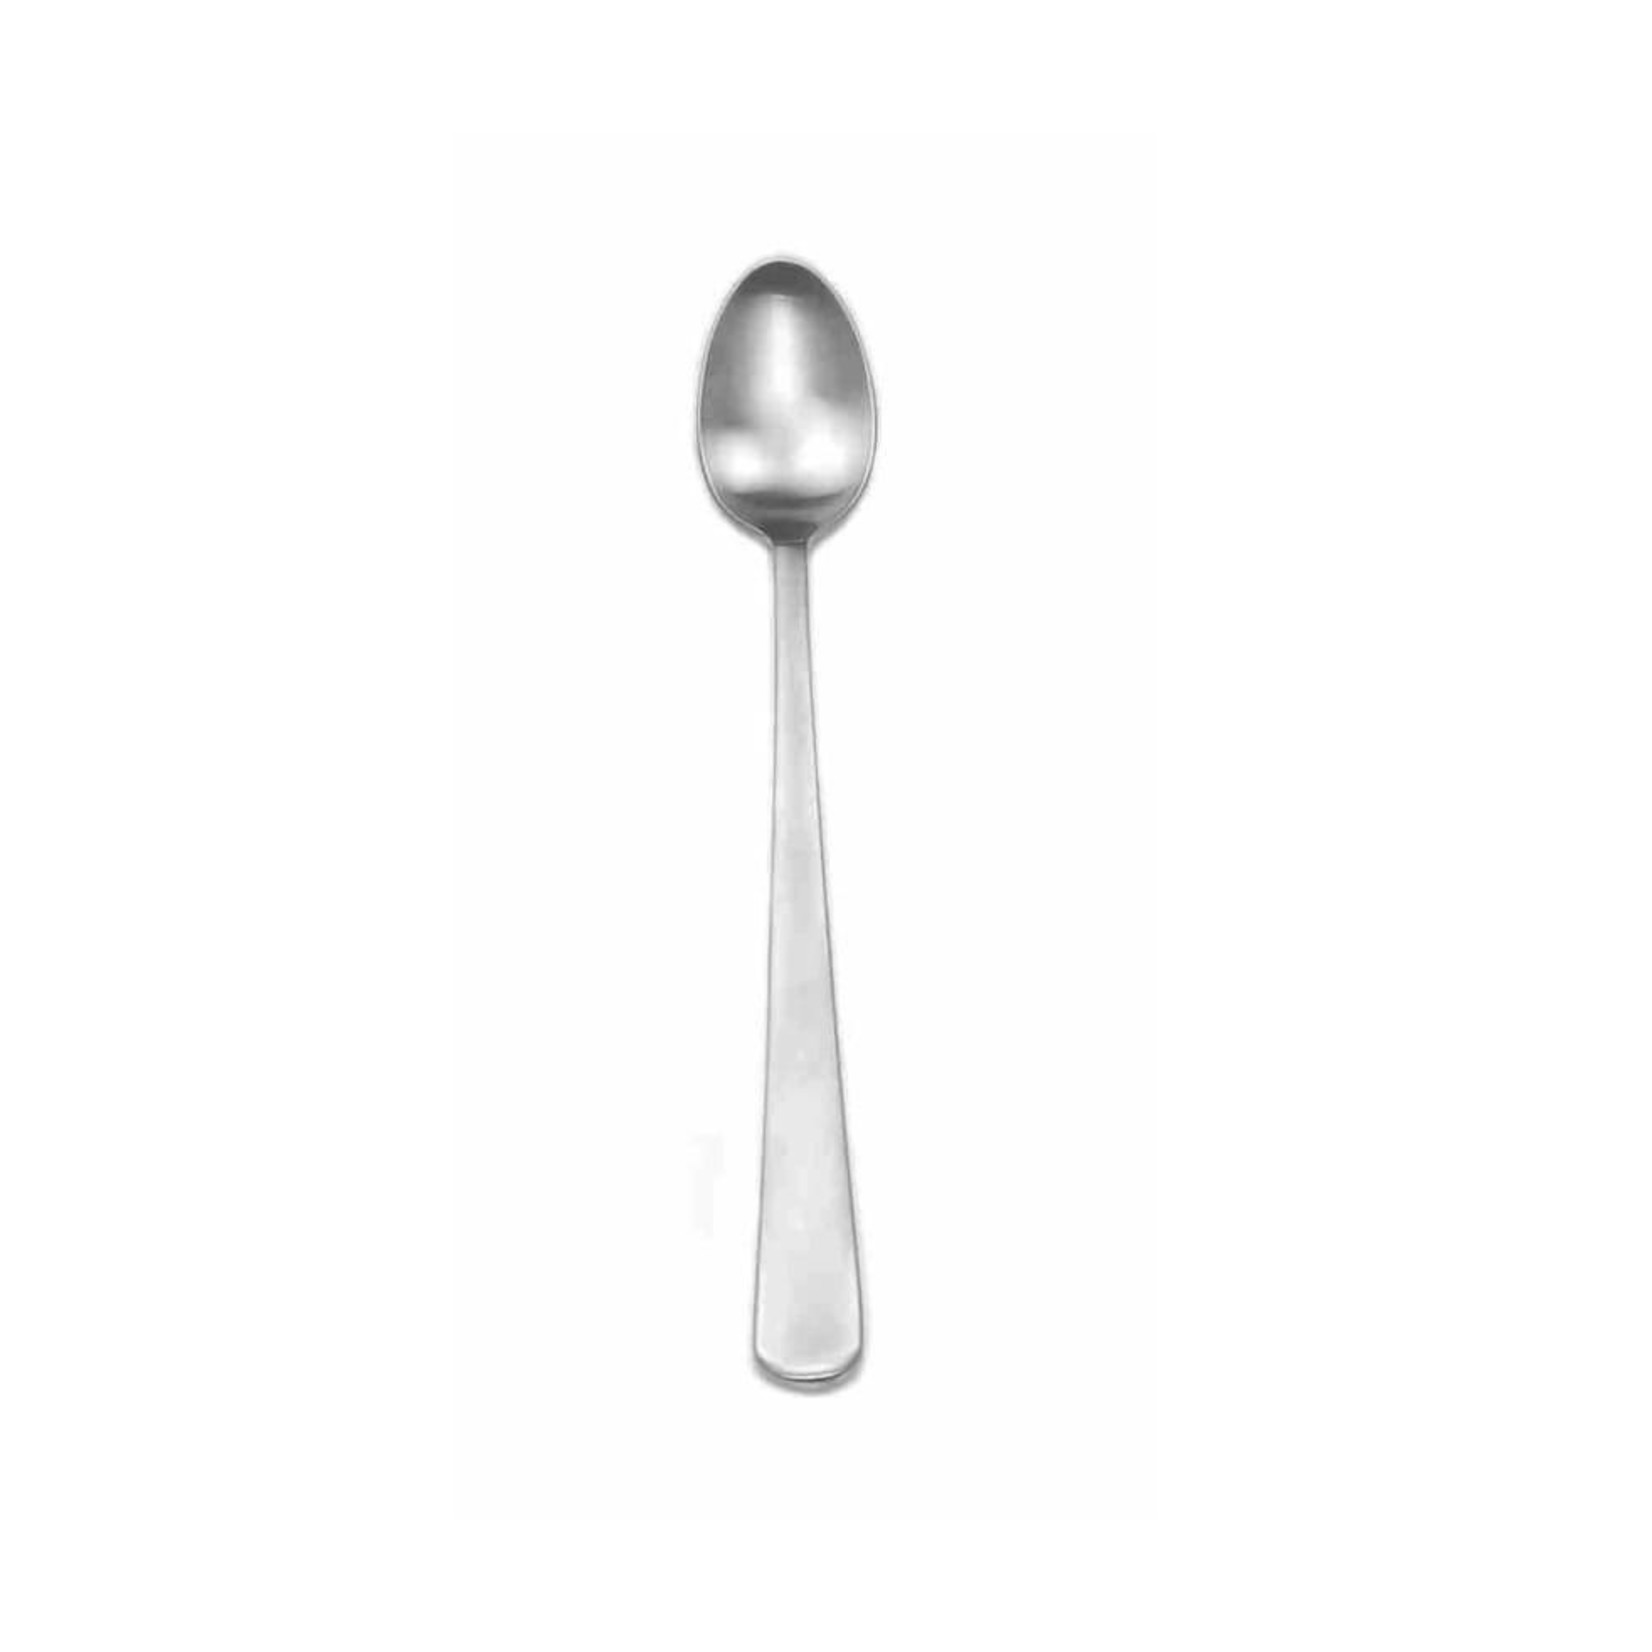 DAVID SHAW Ice Cream Spoons - Stainless set of 4